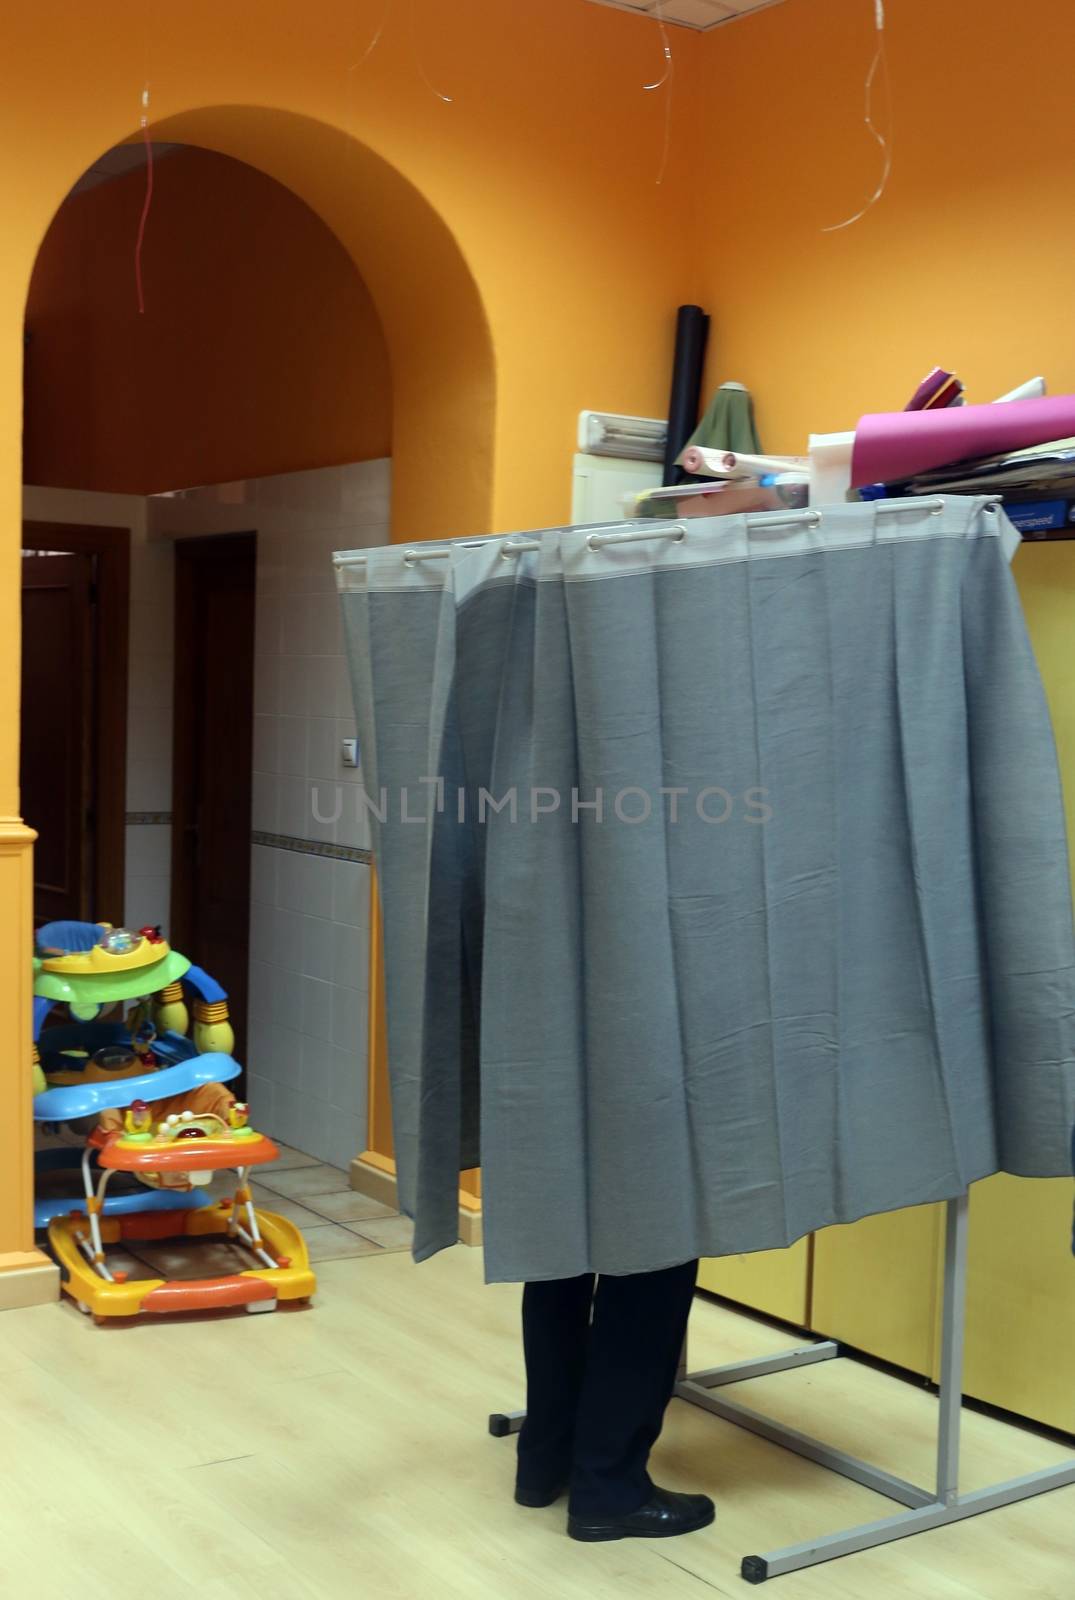 SPAIN, Asturias: A voting booth is pictured in Asturias, Spain on December 20, 2015 as Spain heads to the polls to elect all 350 members of its lower house of parliament in the tightest election in decades which polls suggest will end the traditional two-party system.  